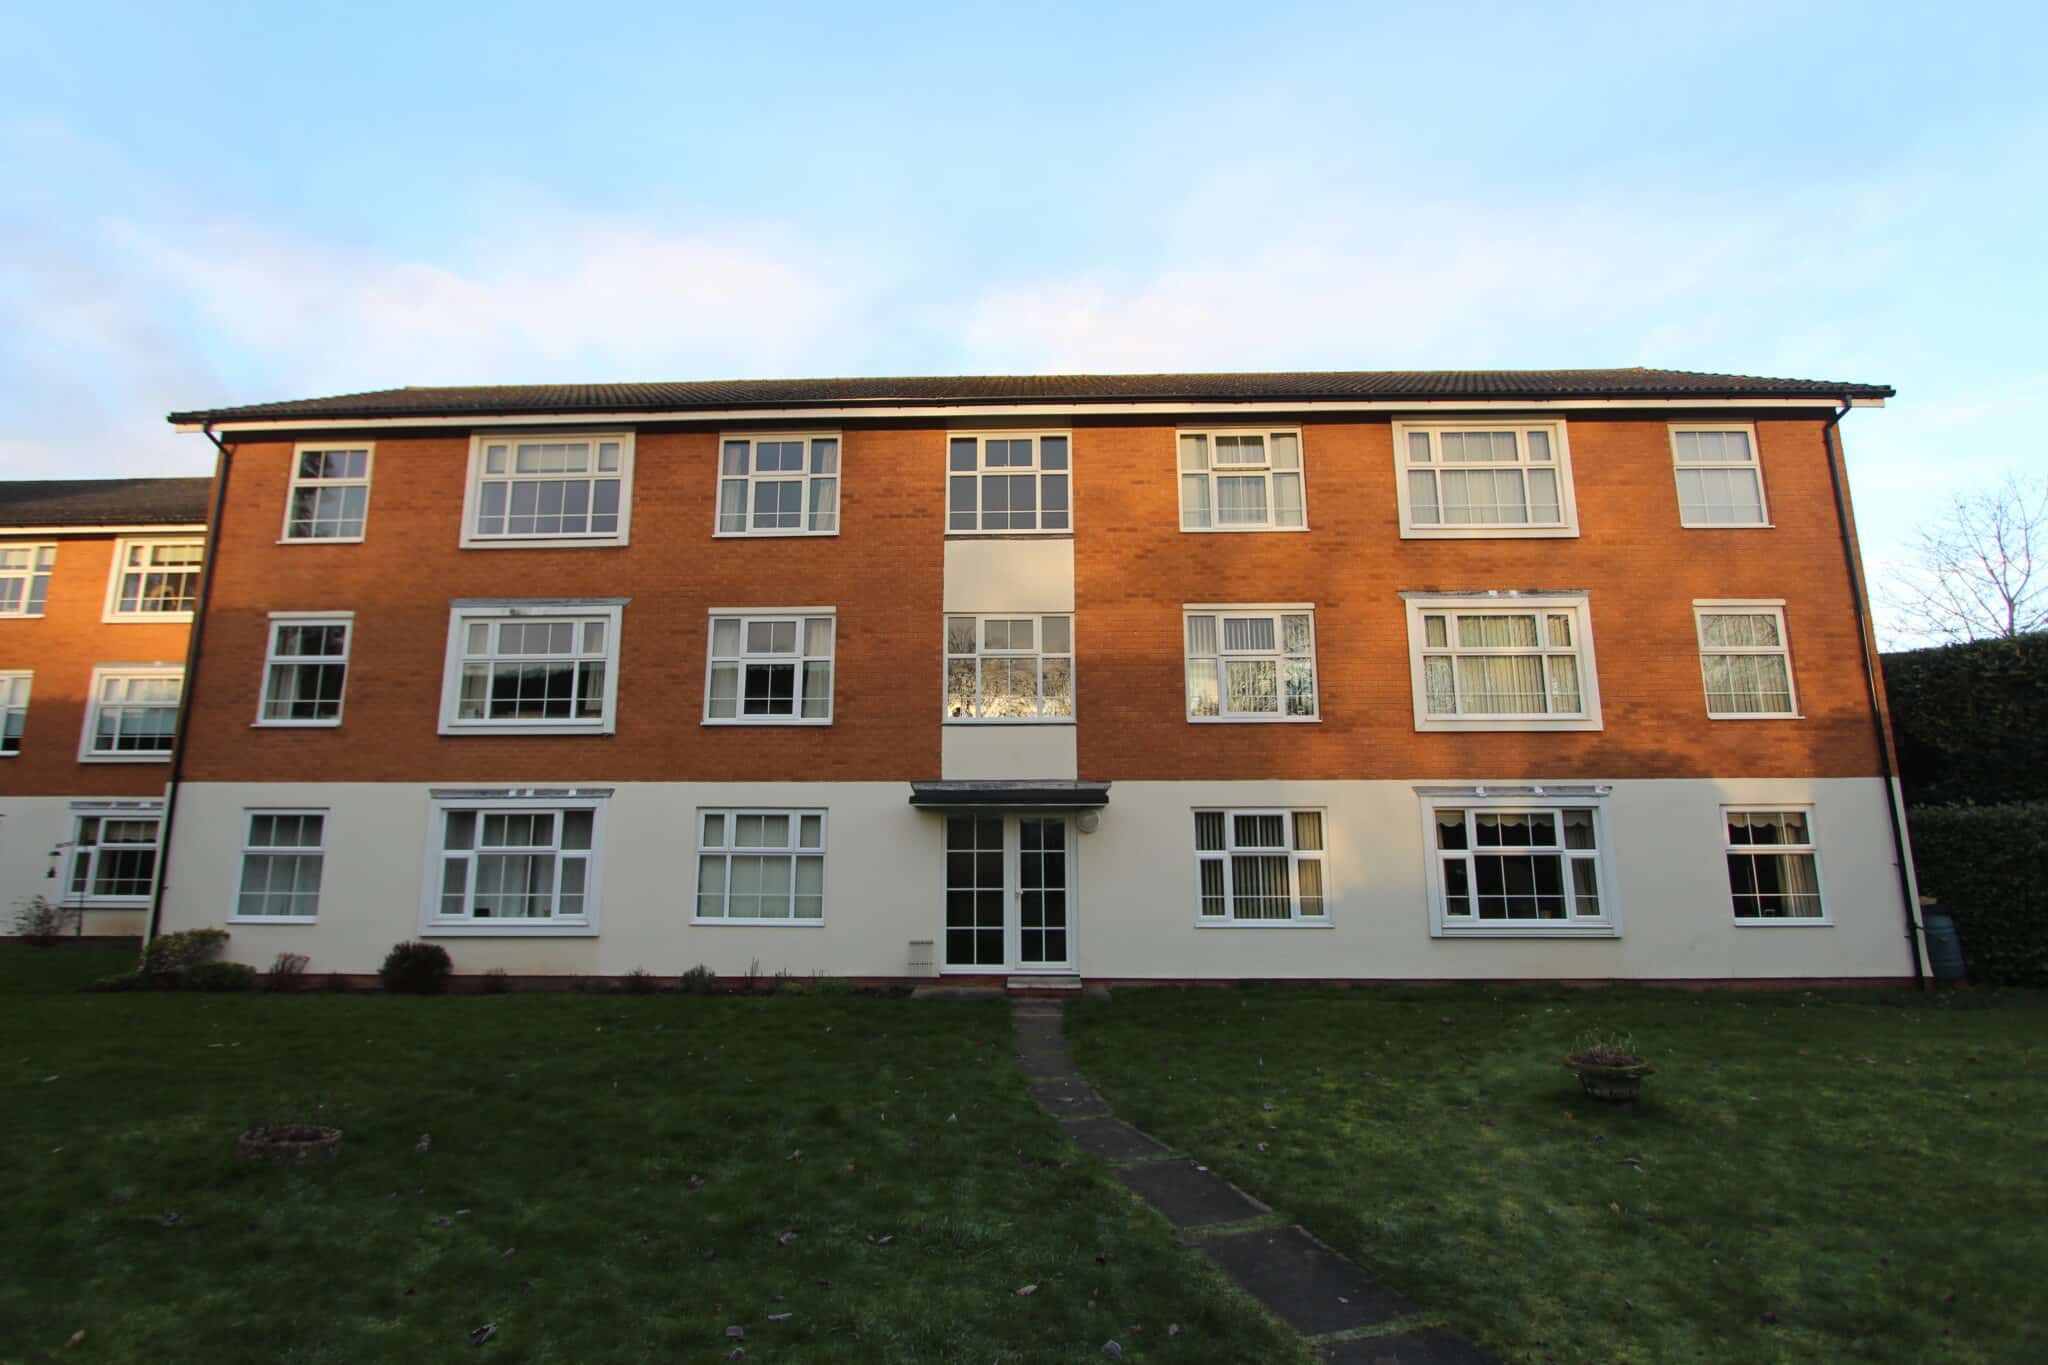 Flat 10, Starbold Court, Starbold Crescent, Knowle, Solihull, B93 9LB